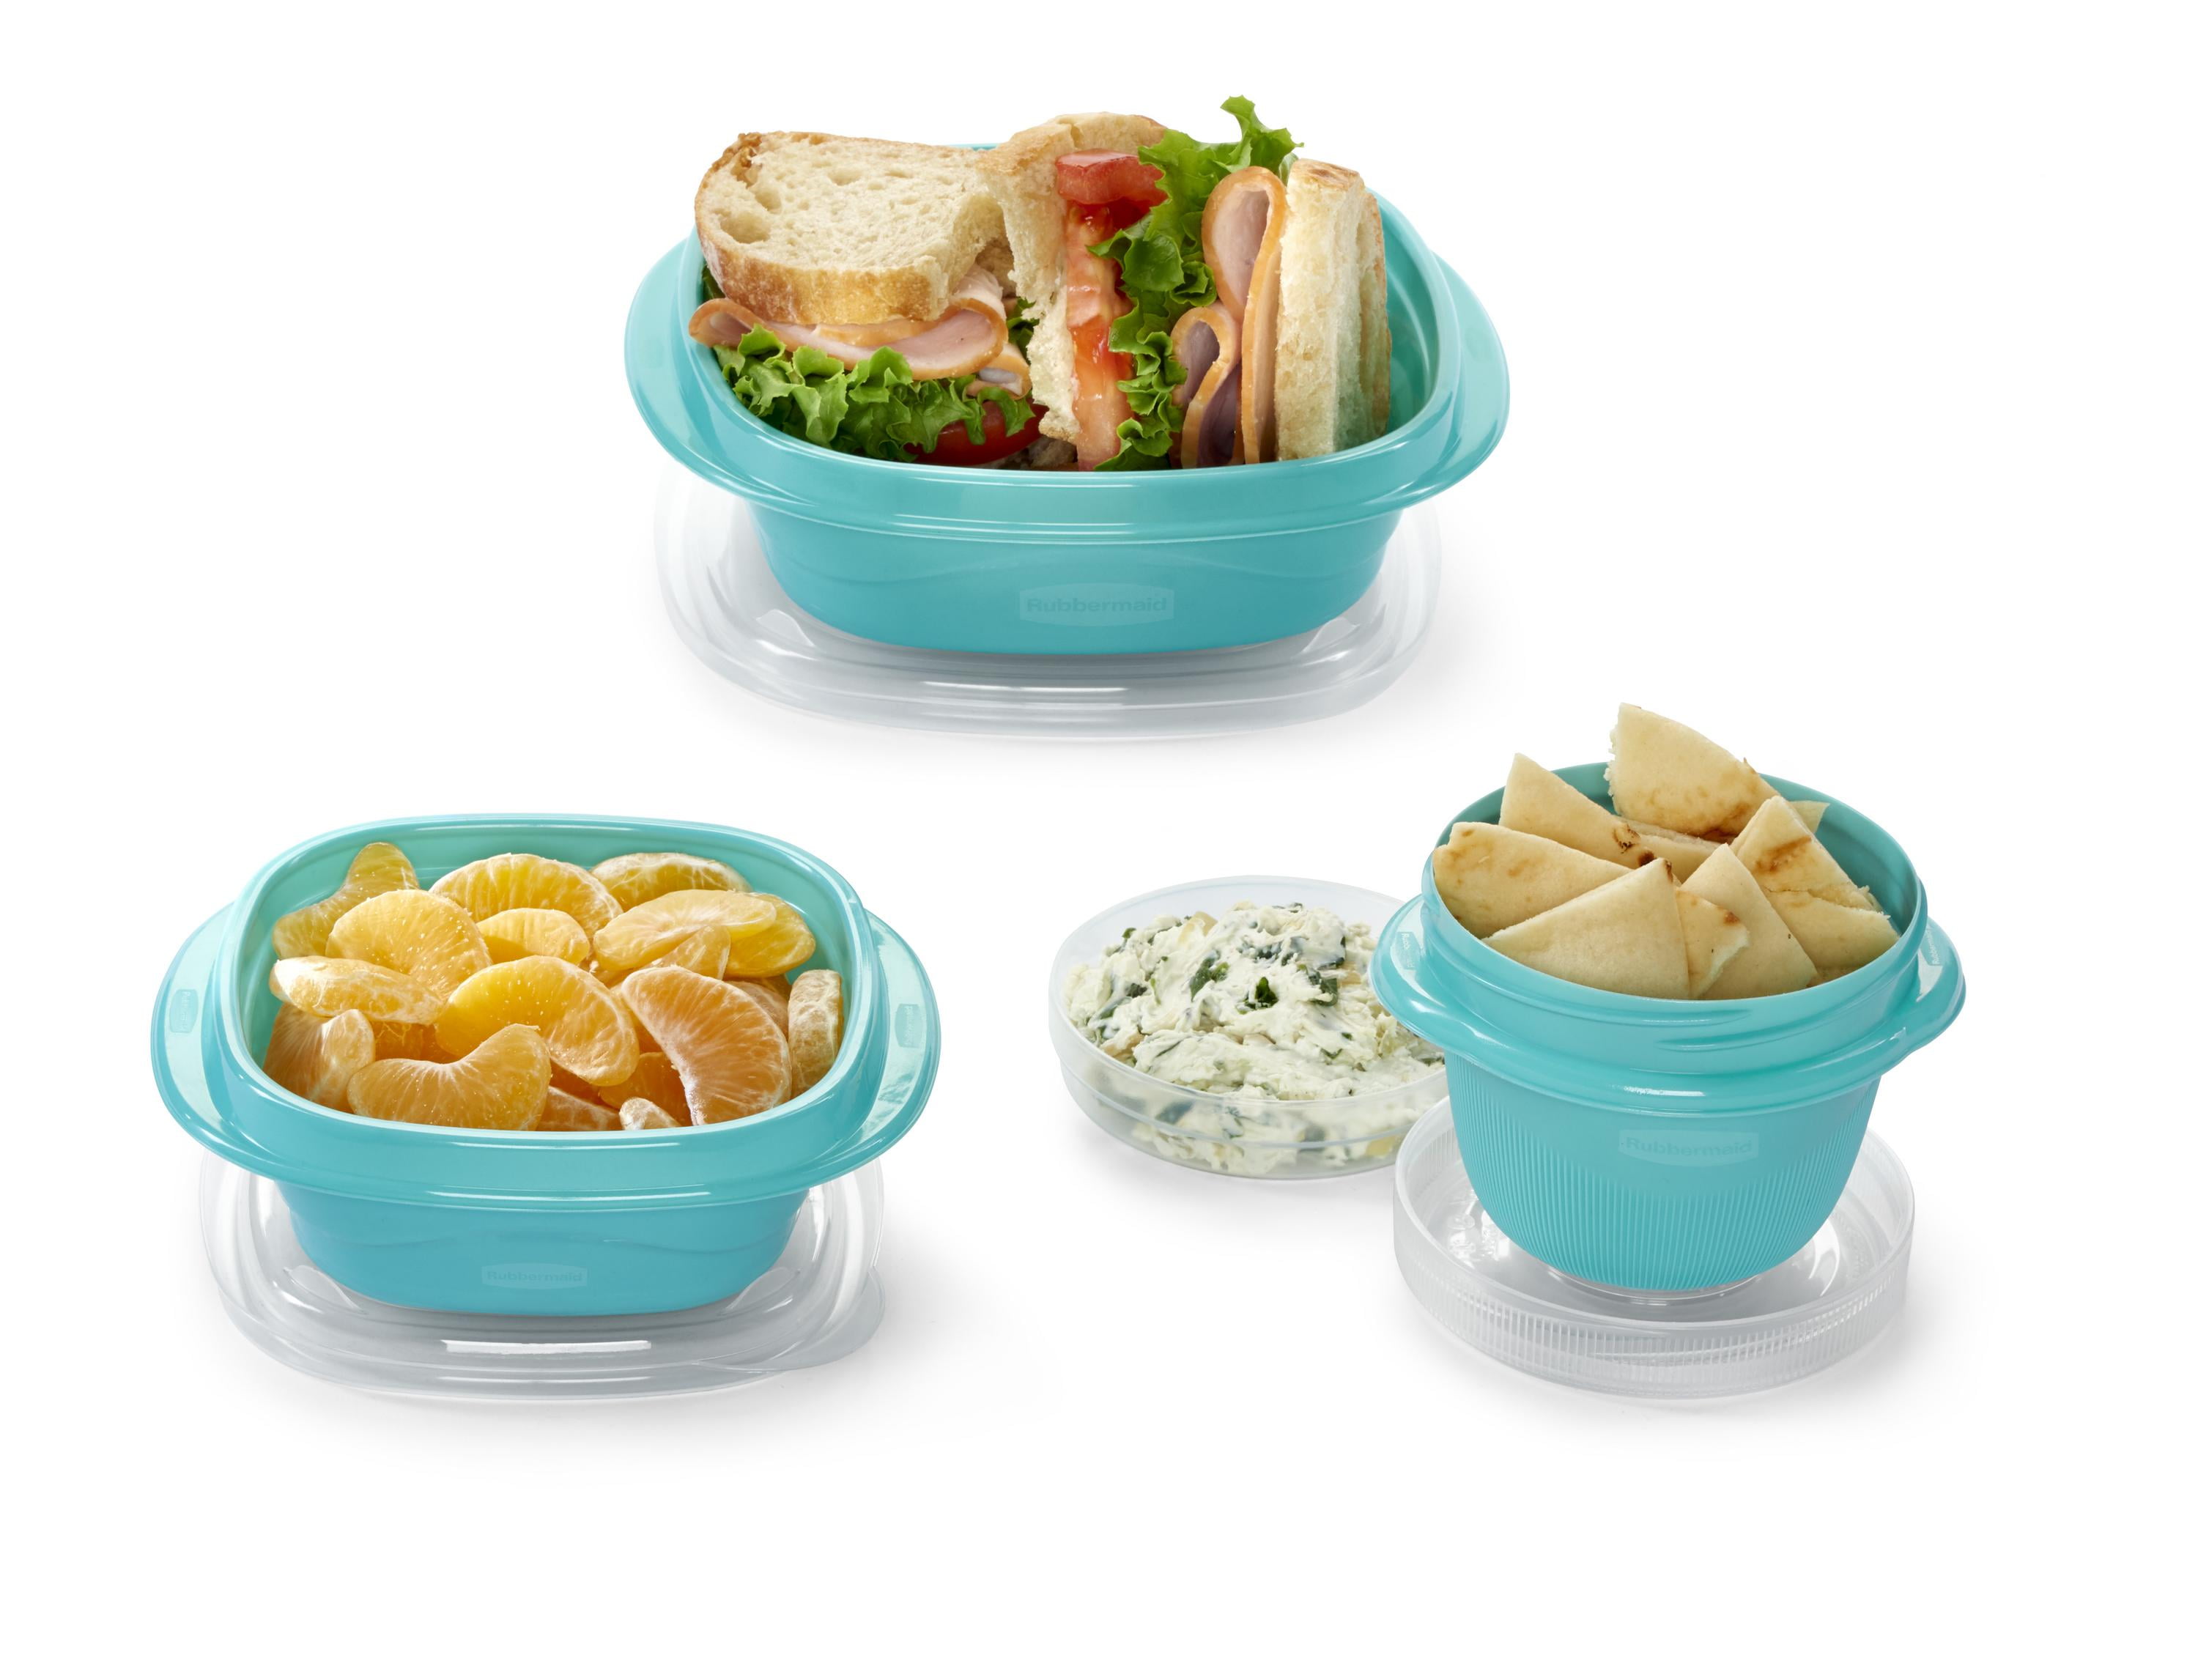 Rubbermaid TakeAlongs On the Go Food Storage and Meal Prep Containers, 16-Piece Lunch Set, Teal Splash